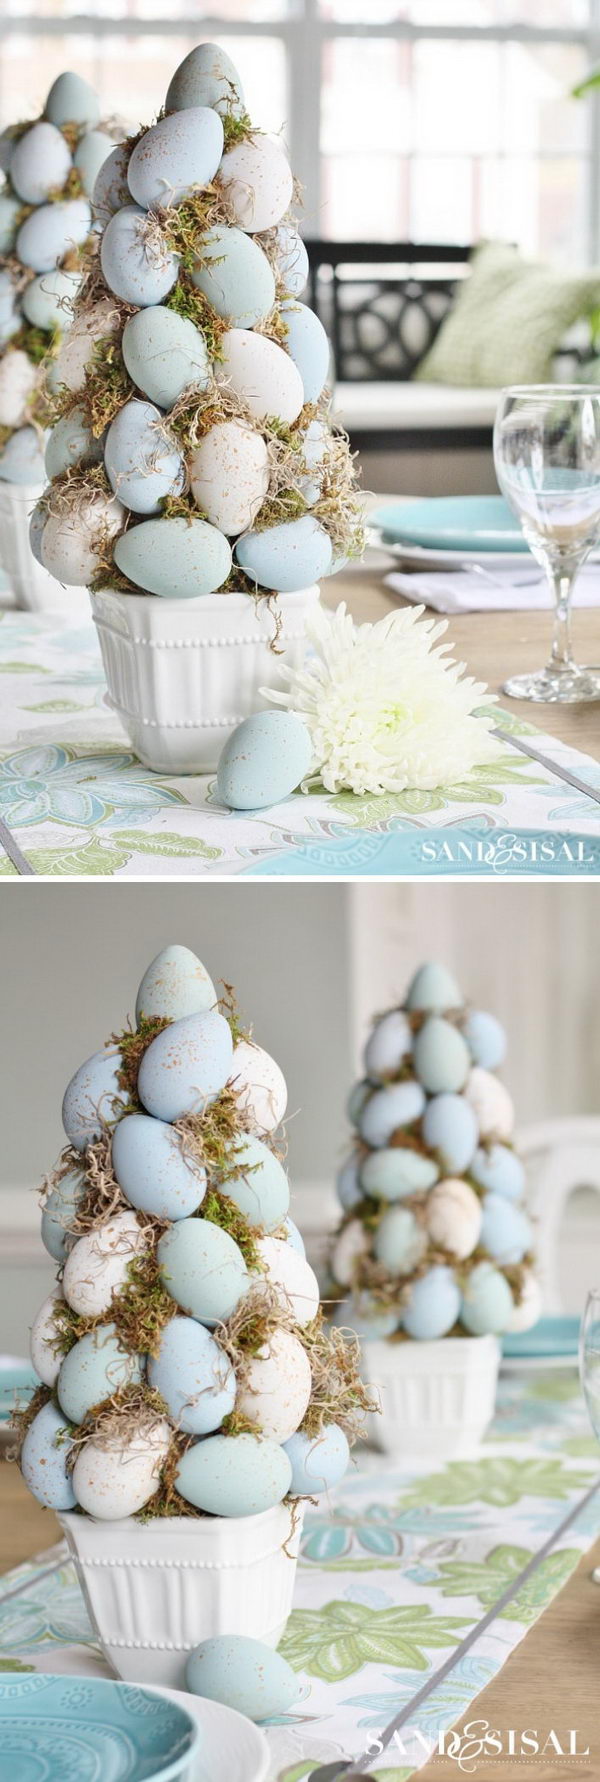 30 Creative Easter Decor DIY Projects - Hative